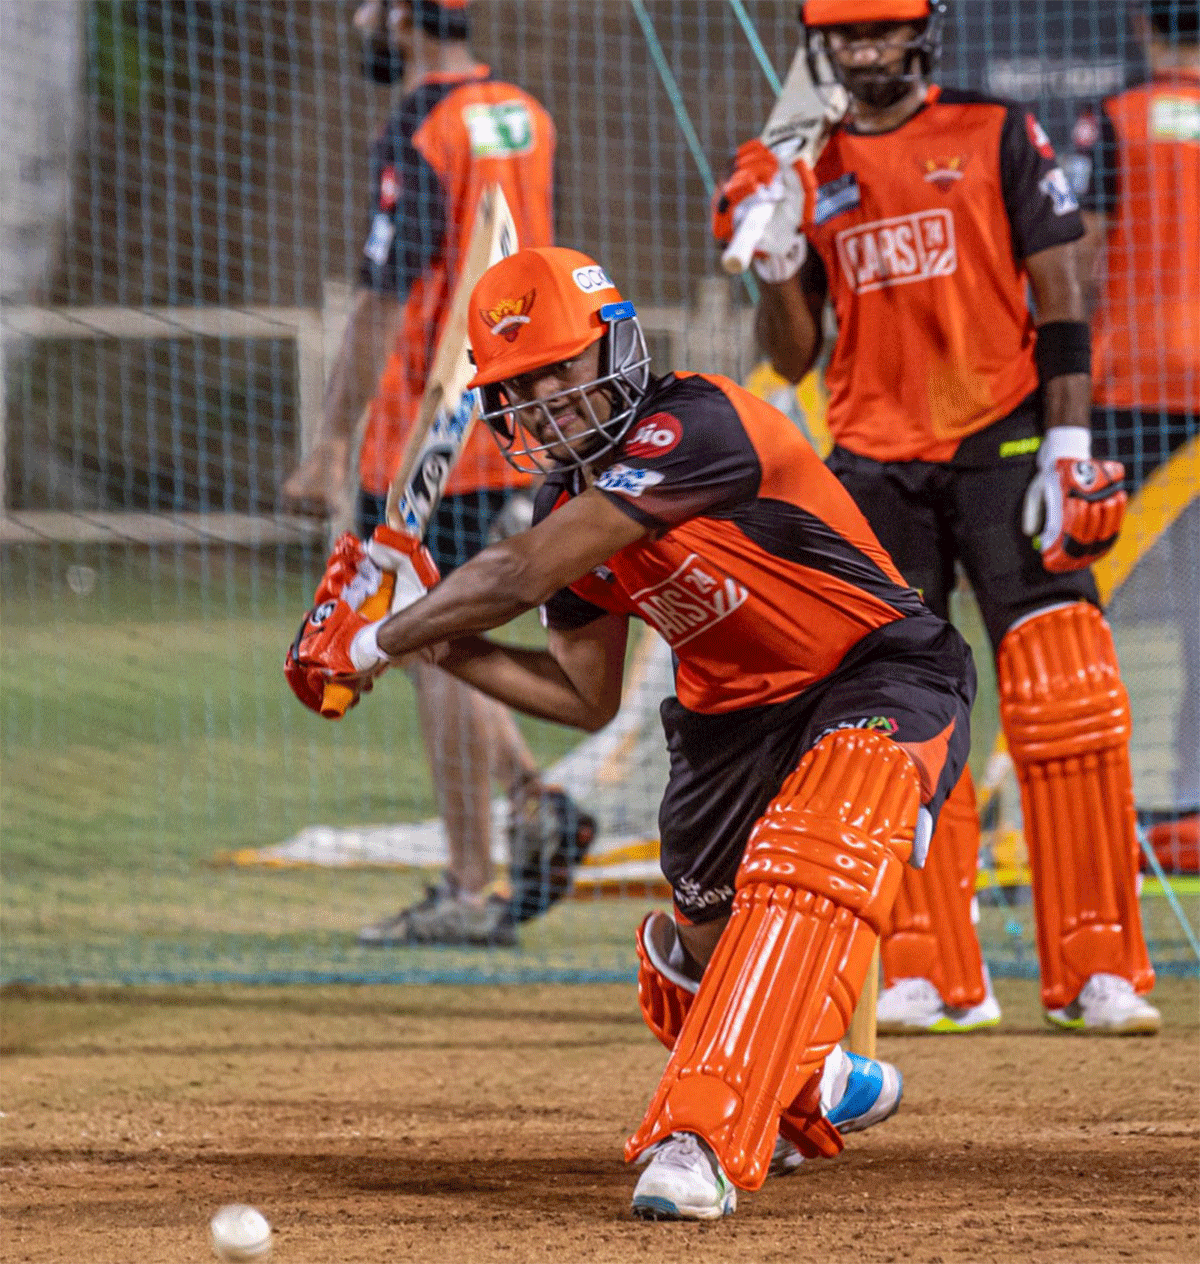 SunRisers Hyderabad's Priyam Garg bats in the nets. He will play against his former team on Tuesday